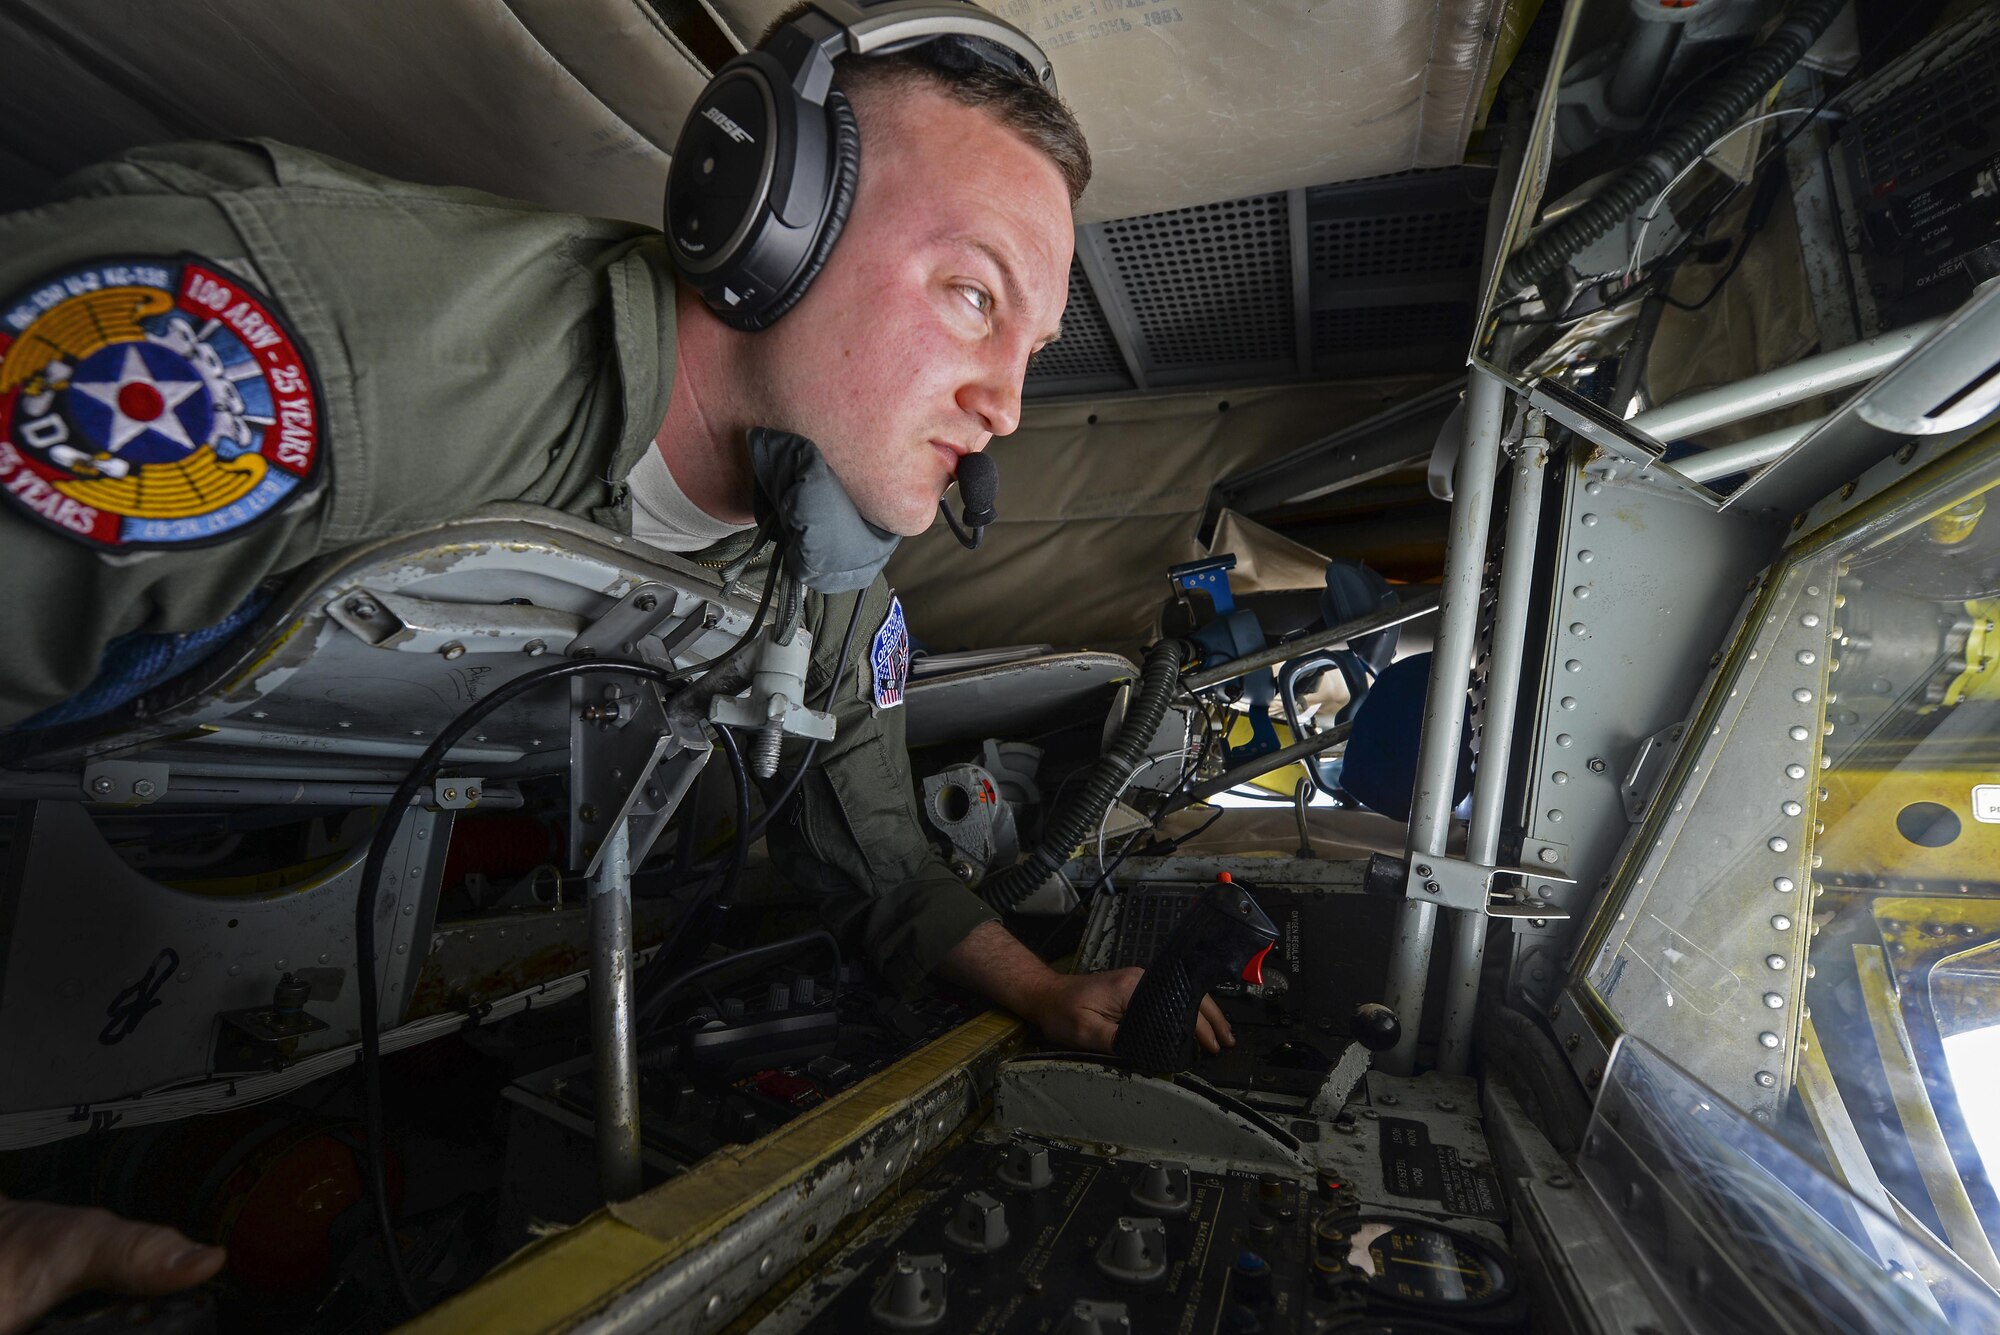 U.S. Air Force Staff Sgt. Bobby Cash, 351st Air Refueling Squadron boom operator, flies the boom of a KC-135 Stratotanker while refueling an F-15E Strike Eagles May 3, 2017. Nearly all internal fuel can be pumped through the flying boom, the KC-135's primary fuel transfer method. (U.S. Air Force photo by Staff Sgt. Micaiah Anthony)